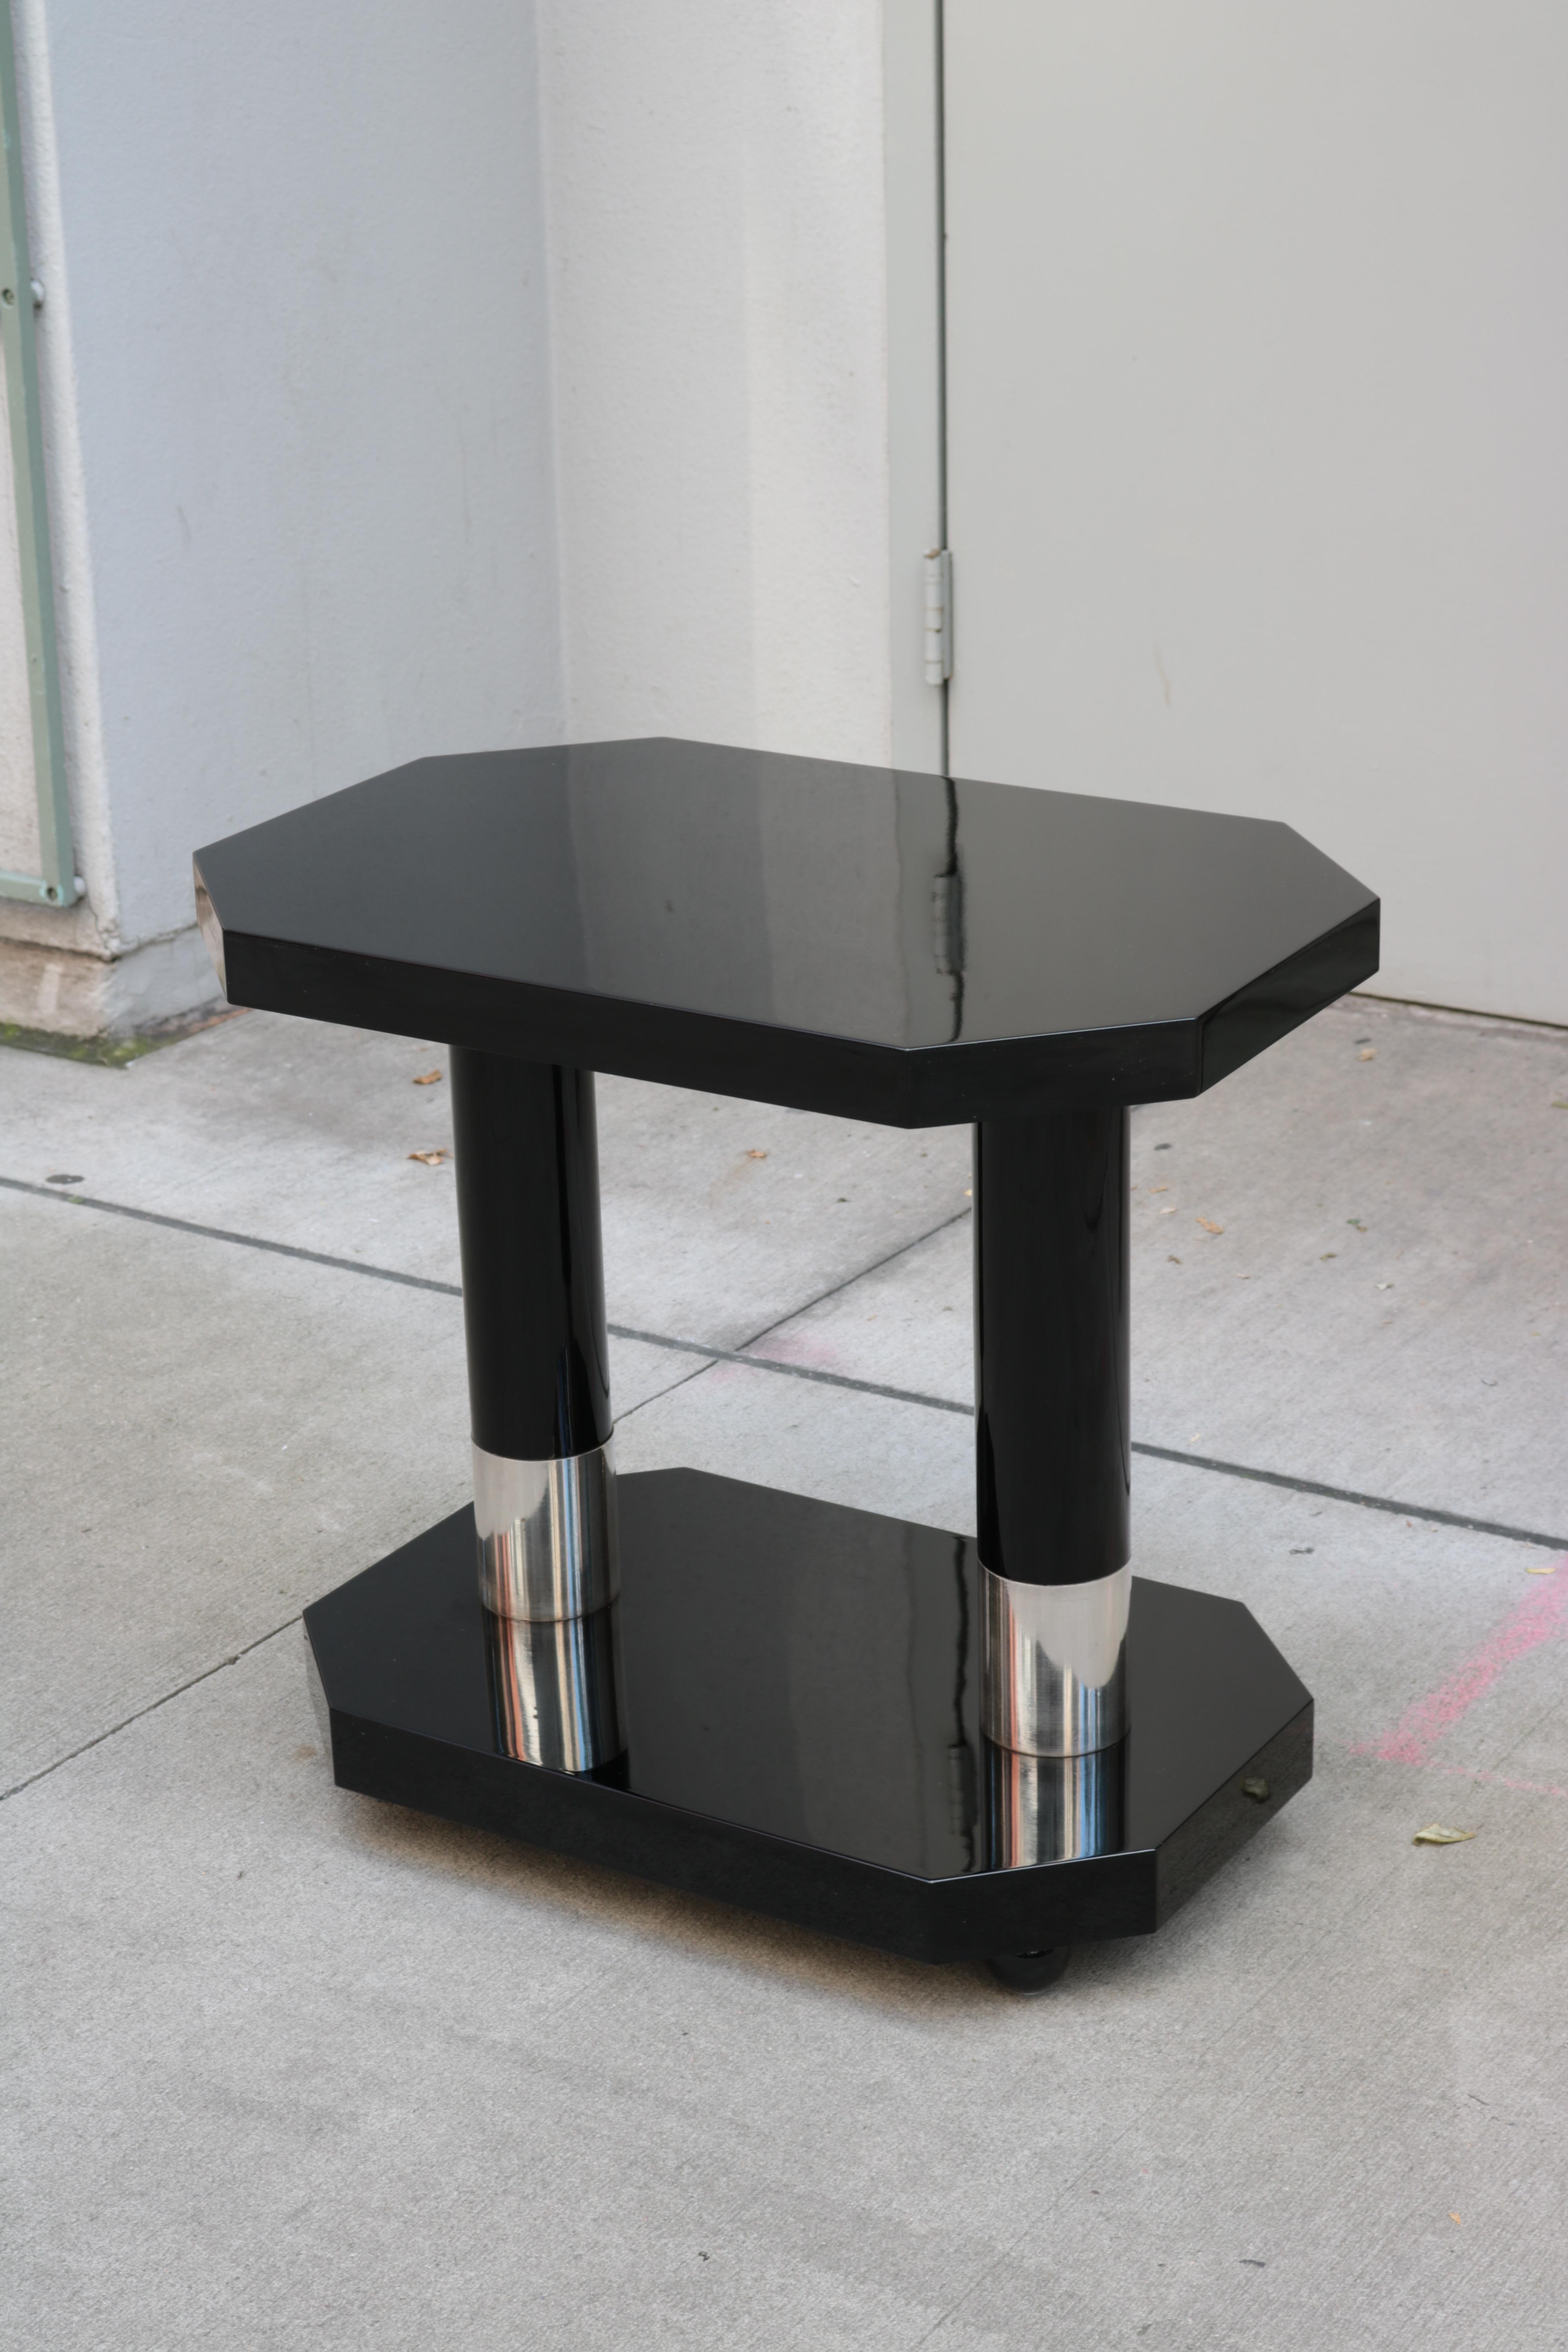 Ebonized contemporary two-tier side table.
Black lacquer with nickel details.